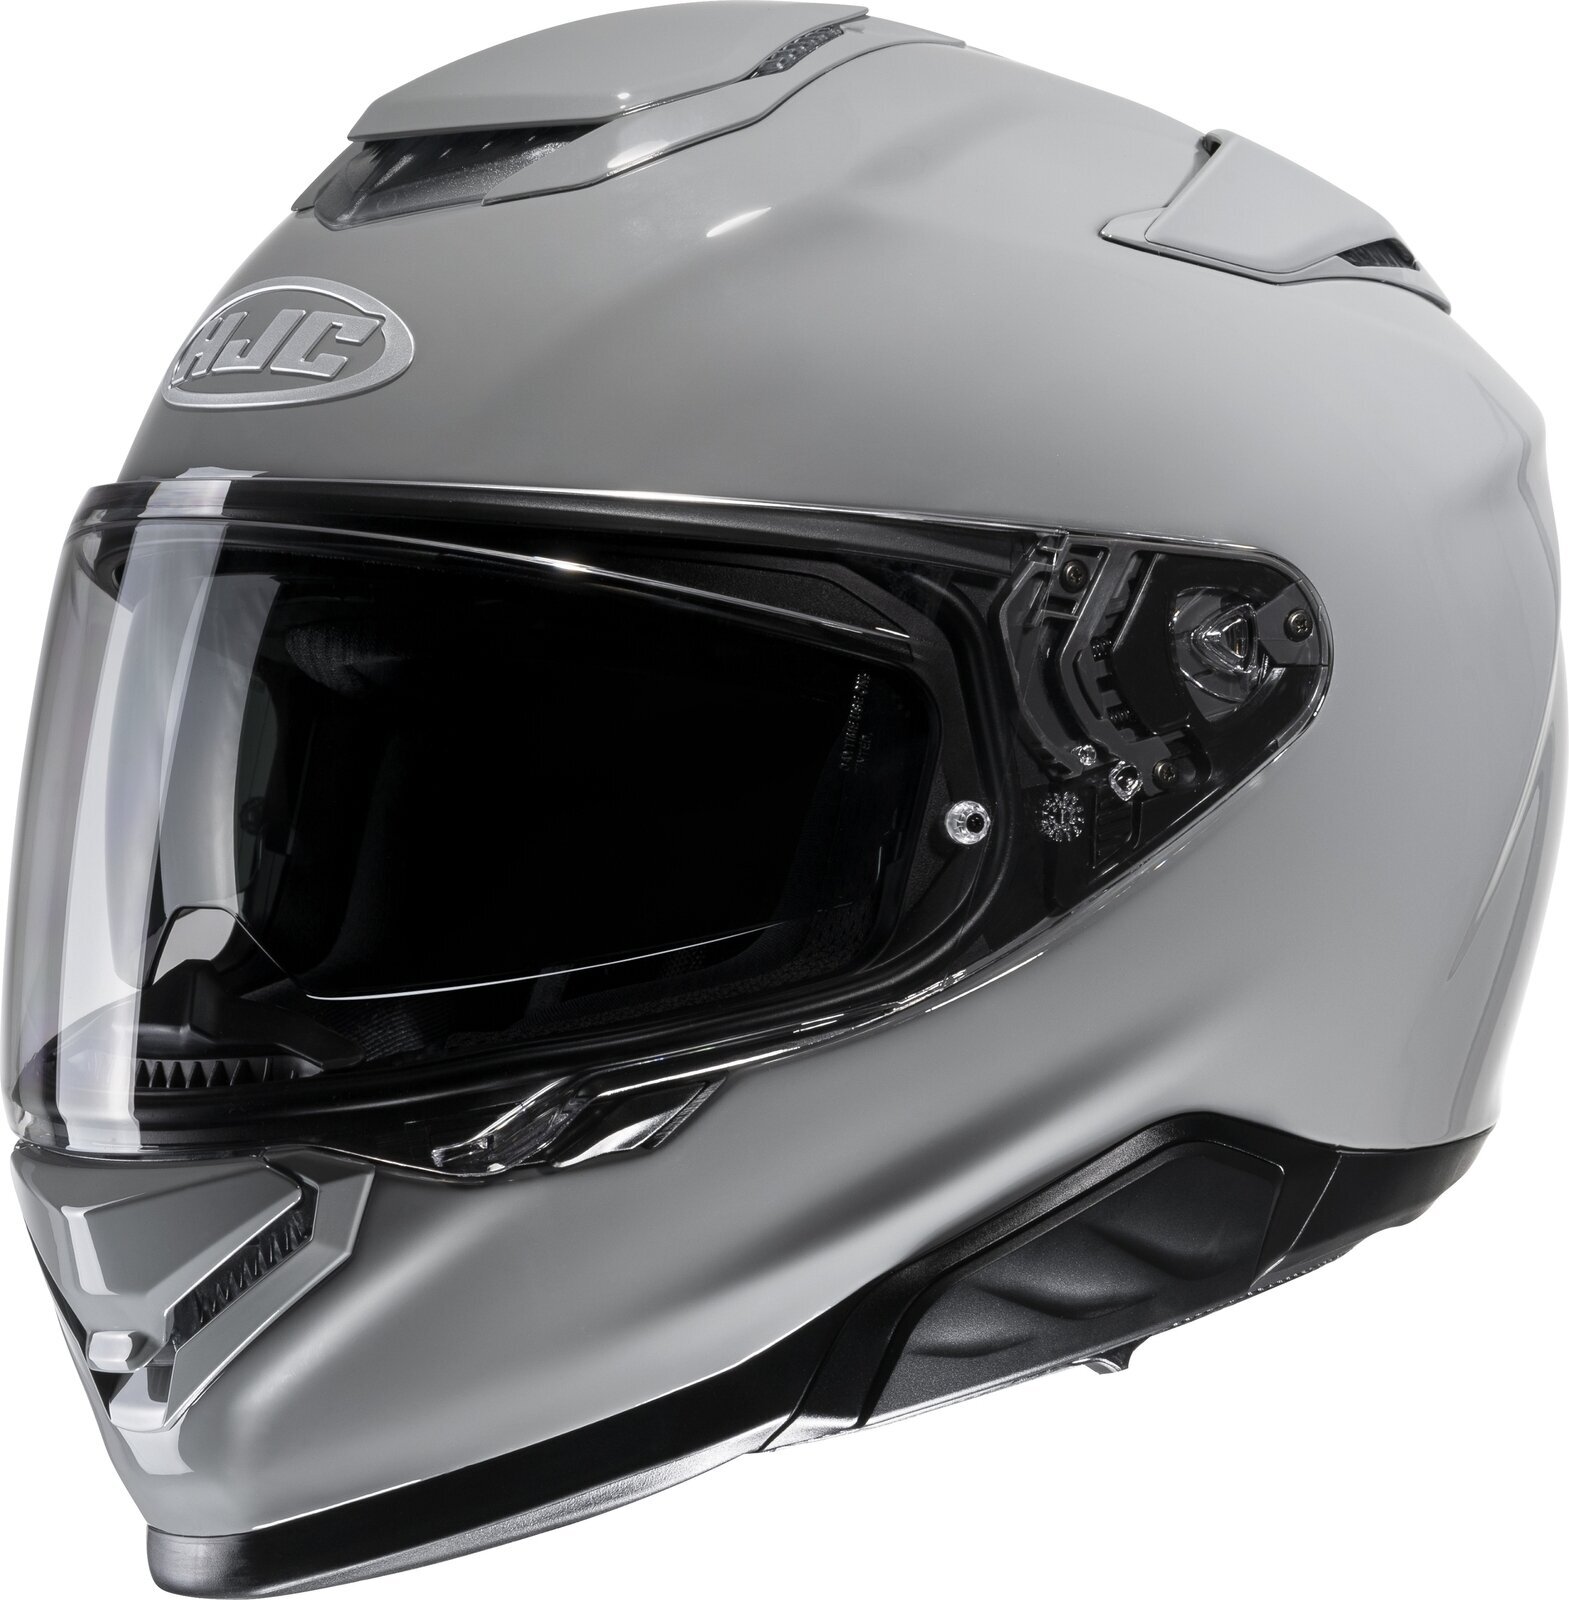 Casque HJC RPHA 71 Solid N.Grey XS Casque